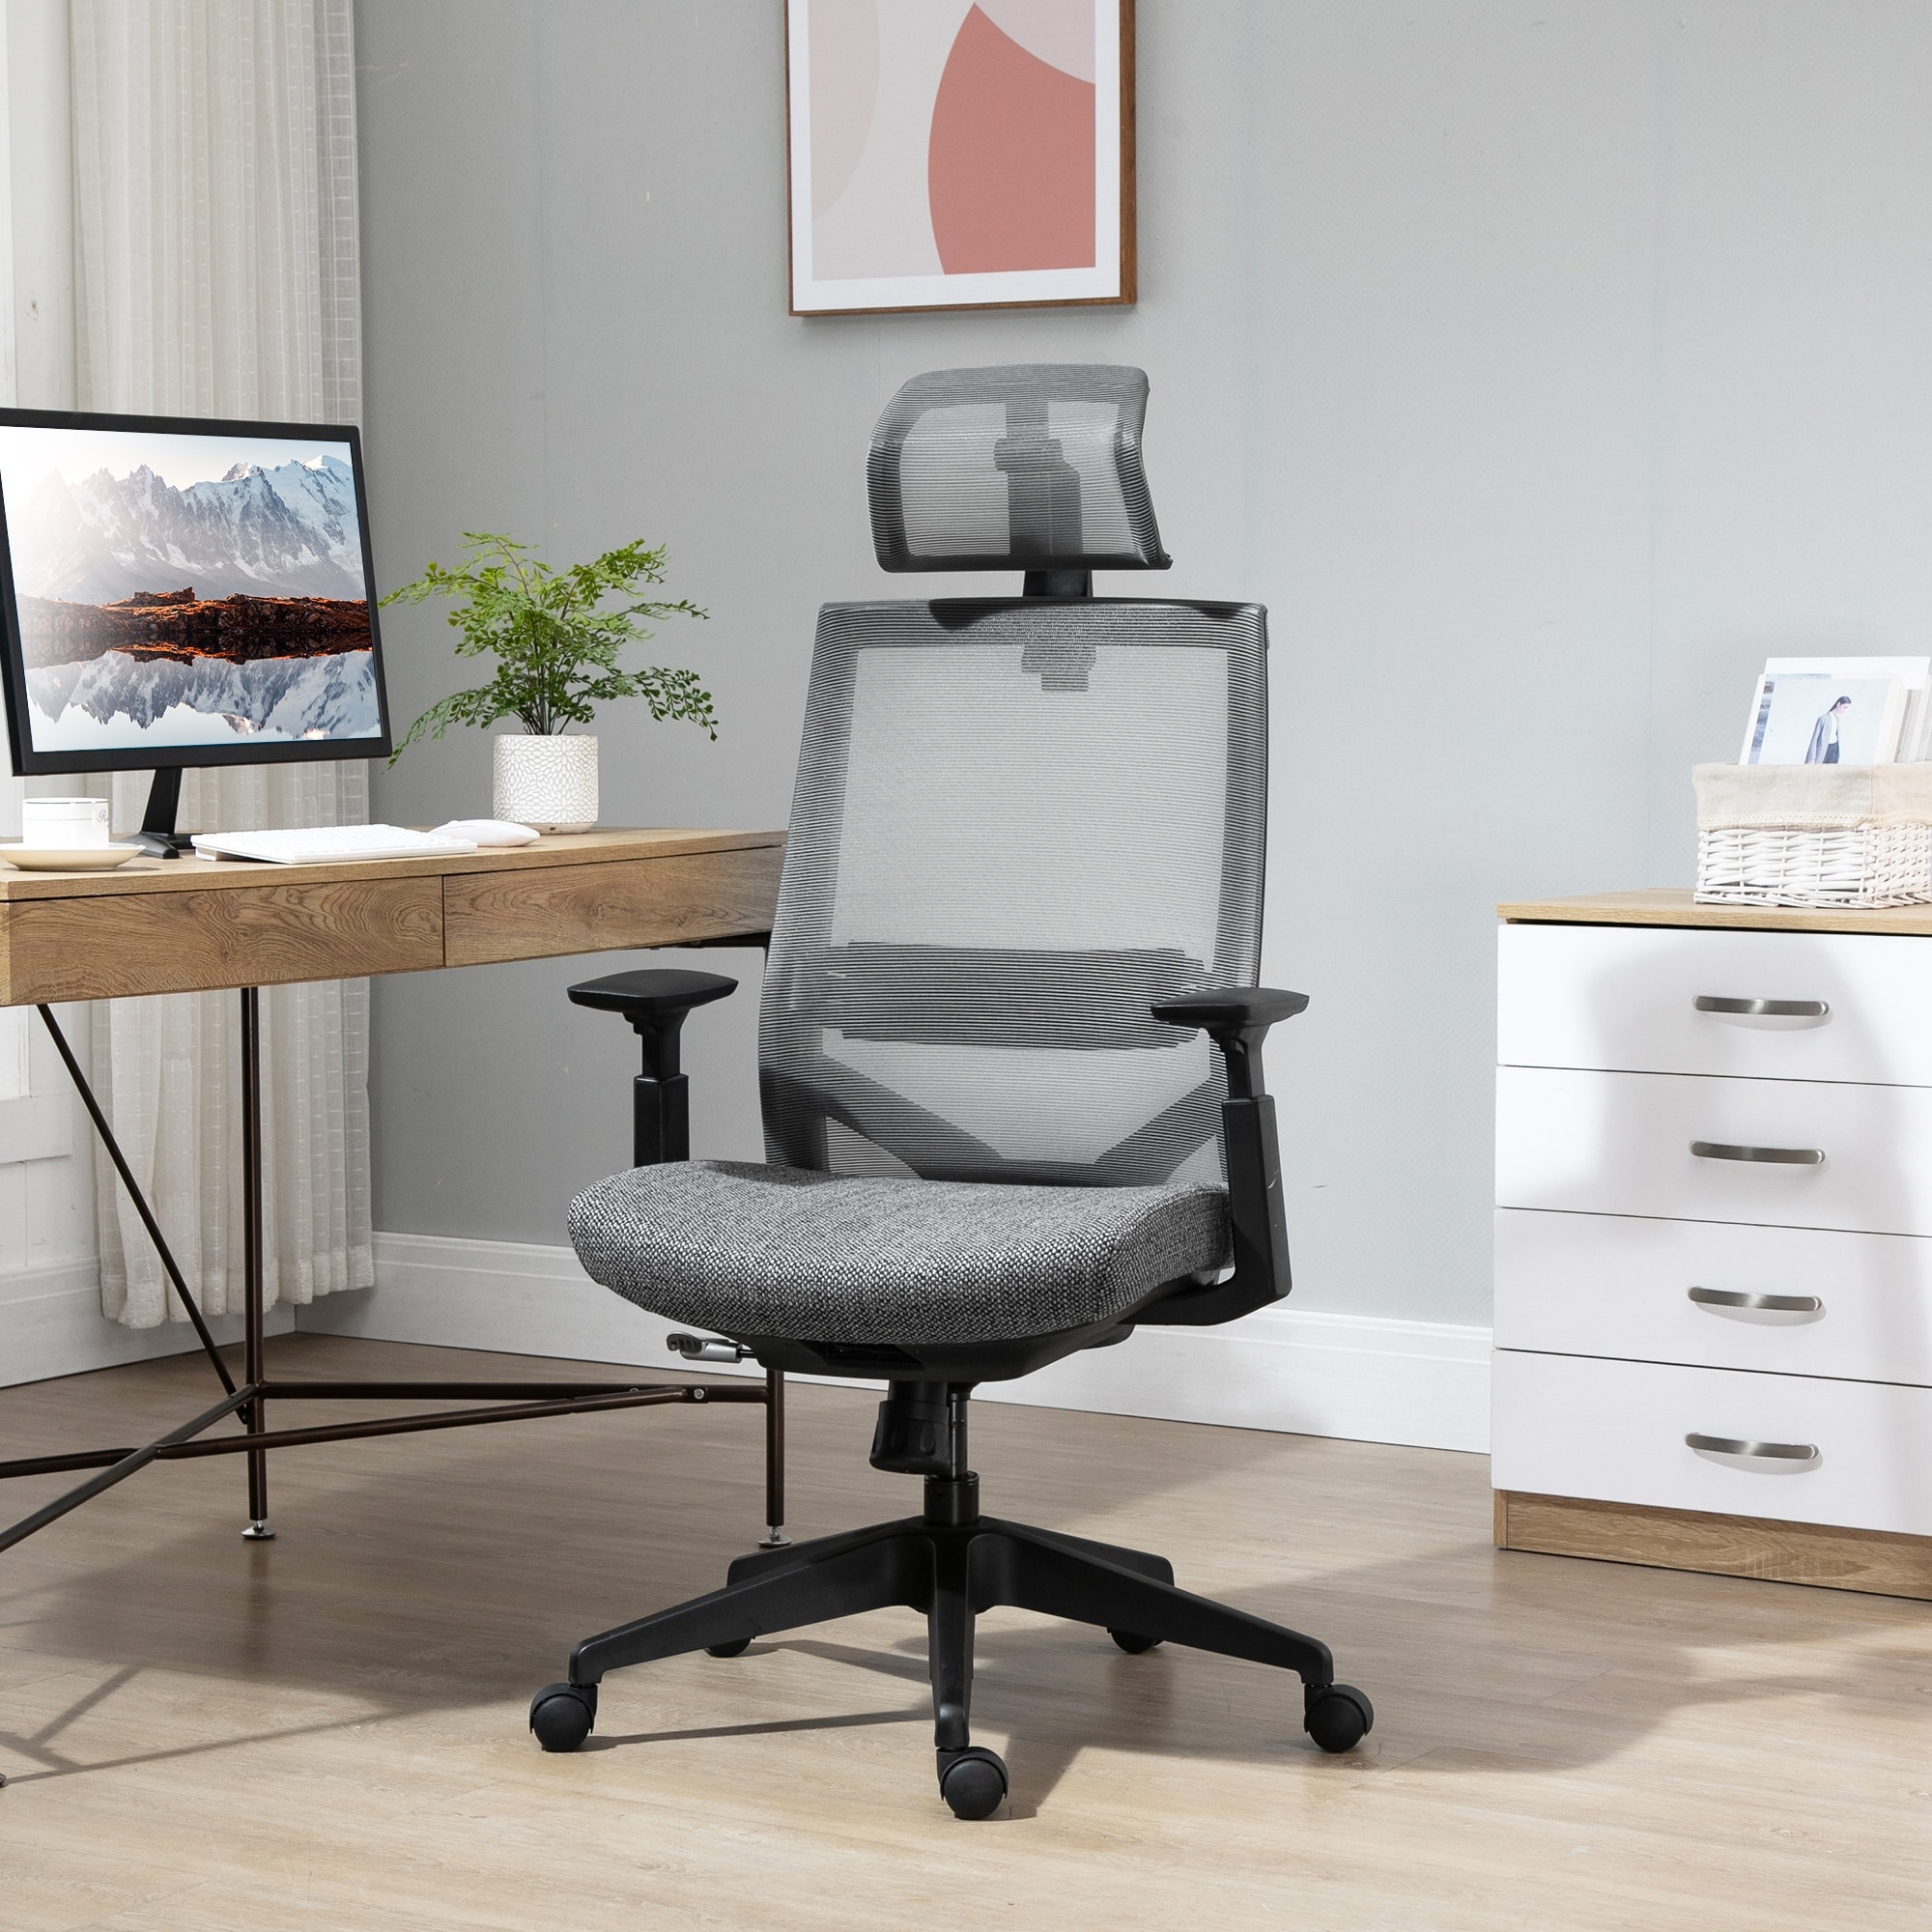 https://ak1.ostkcdn.com/images/products/is/images/direct/78aa3ee7c06508ad9fc22ea06d5120dfbd75d6d8/Vinsetto-High-Back-Ergonomic-Mesh-Desk-Office-Chair-with-Rotate-Headrest%2C-Adjustable-Height%2C-Arm%2C-Lumbar-Back-Support%2C-Grey.jpg